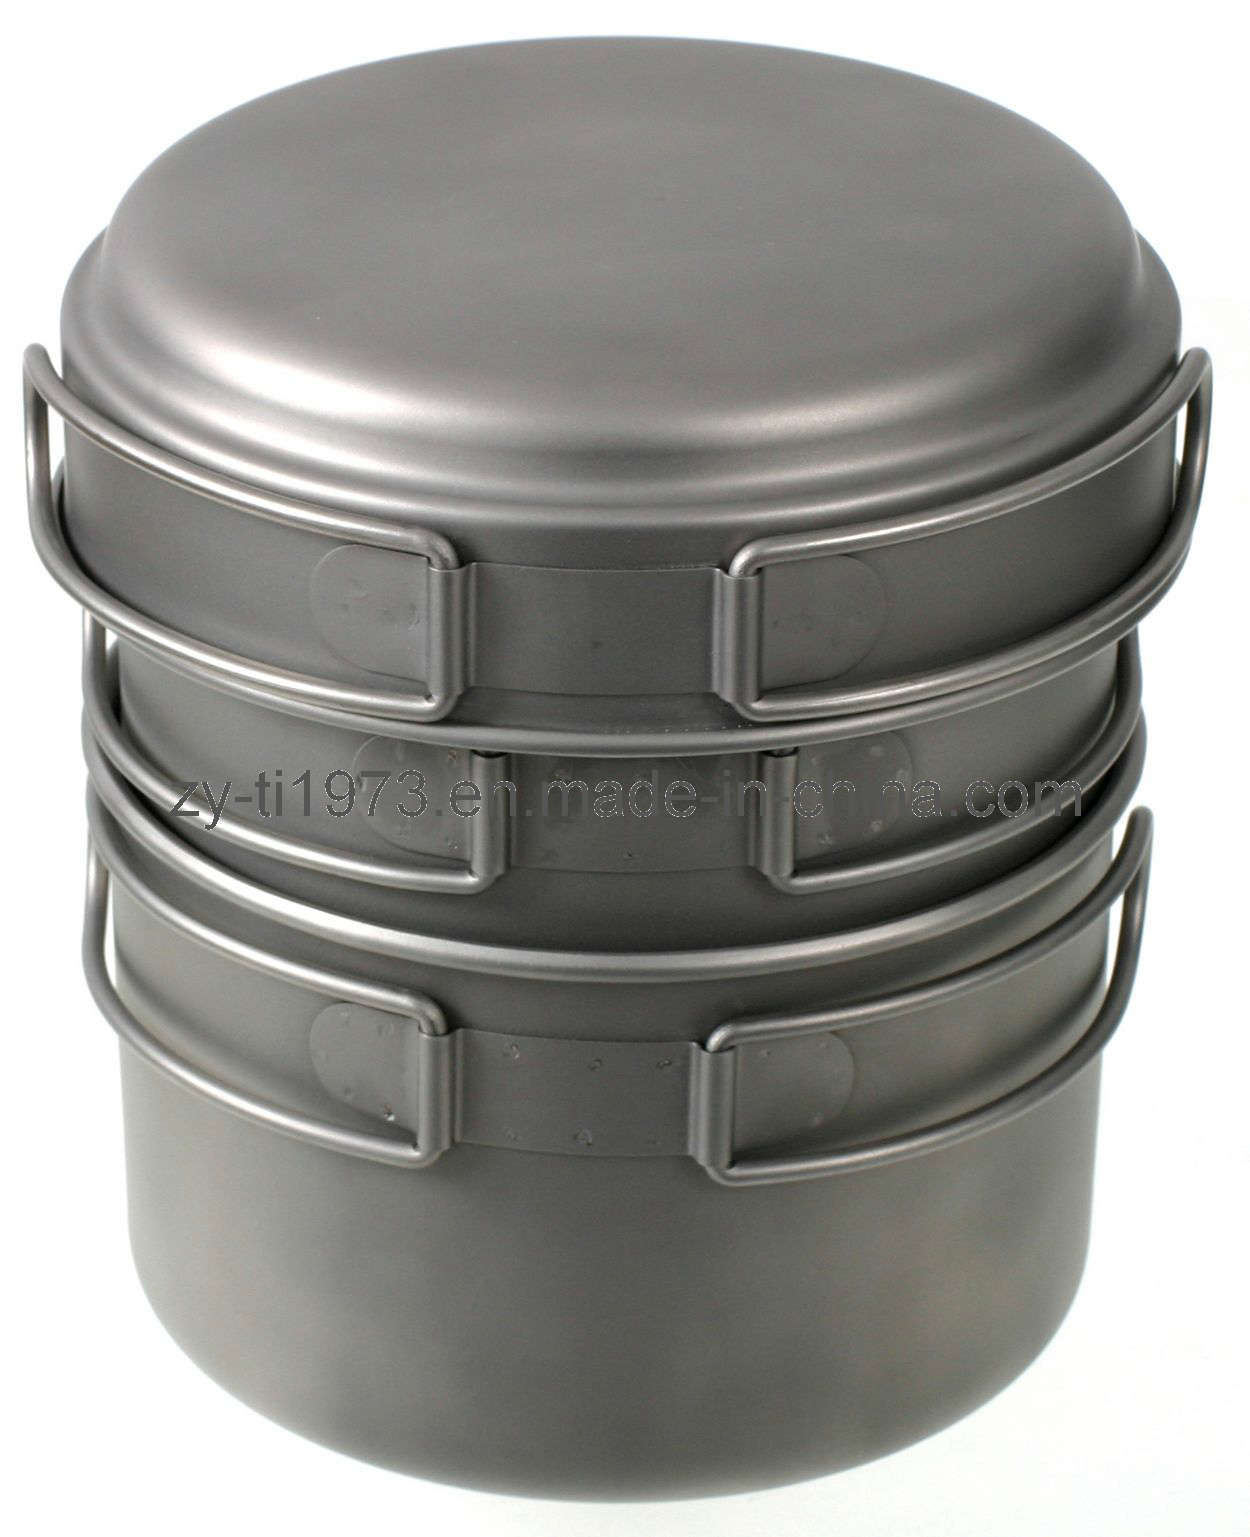 Outdoor Titanium Storage (GR2) for Camping